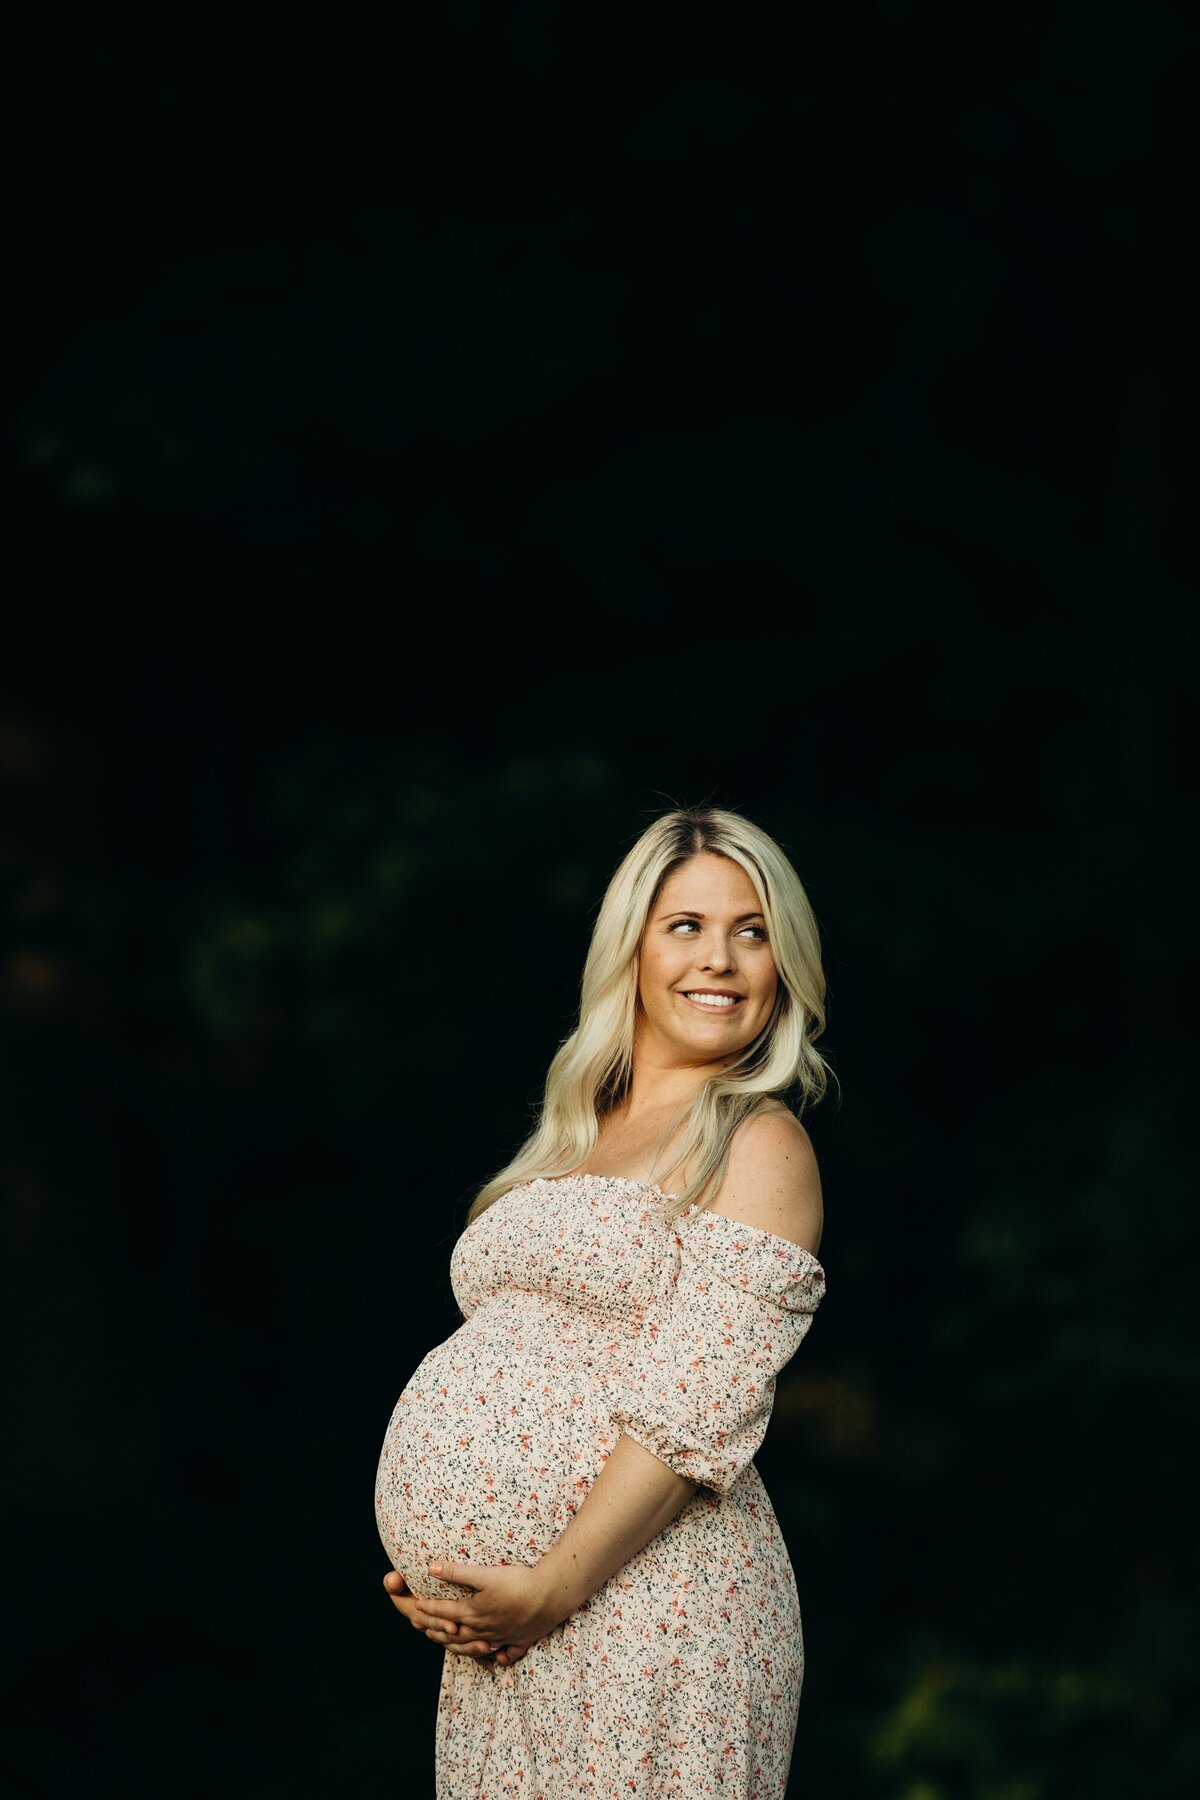 King-of-prussia-maternity-photographer-013